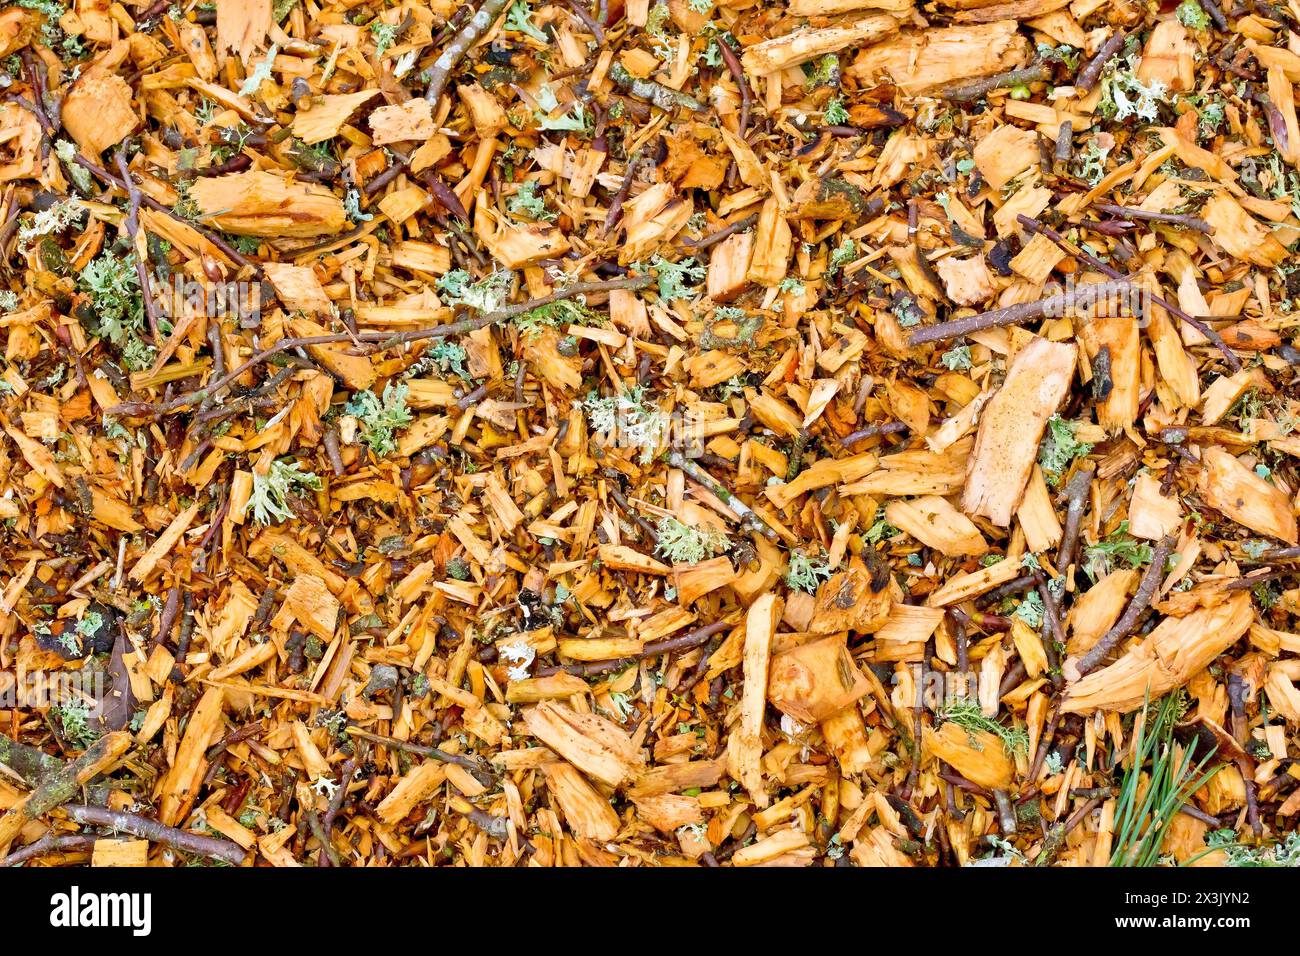 Close up of a pile of wood chips left lying on a woodland floor after a fallen tree was cleared away. Stock Photo